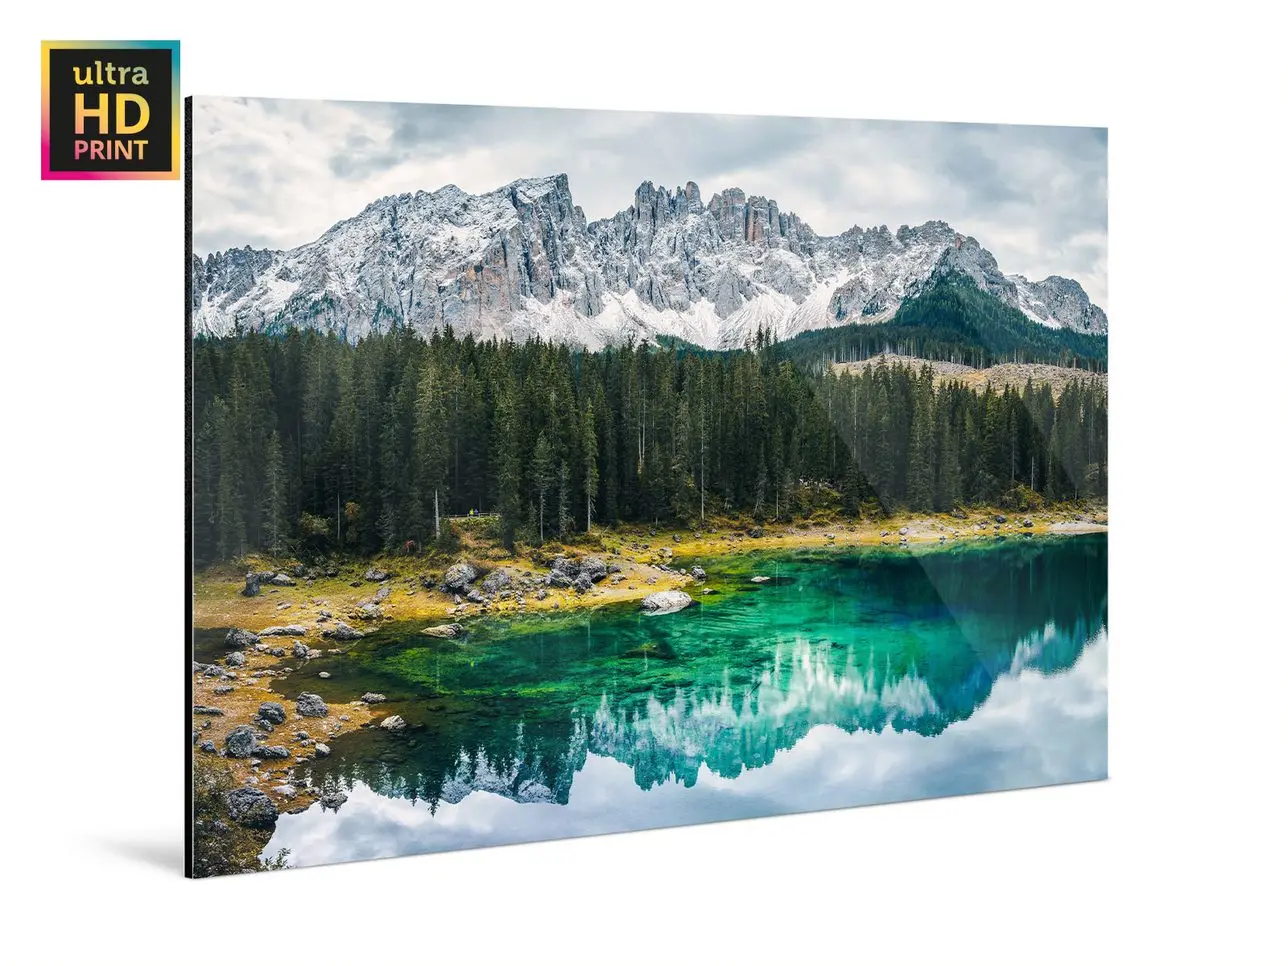 A mountain and a forest reflected in a lake on a ultraHD Photo Print On Aluminum Backing.